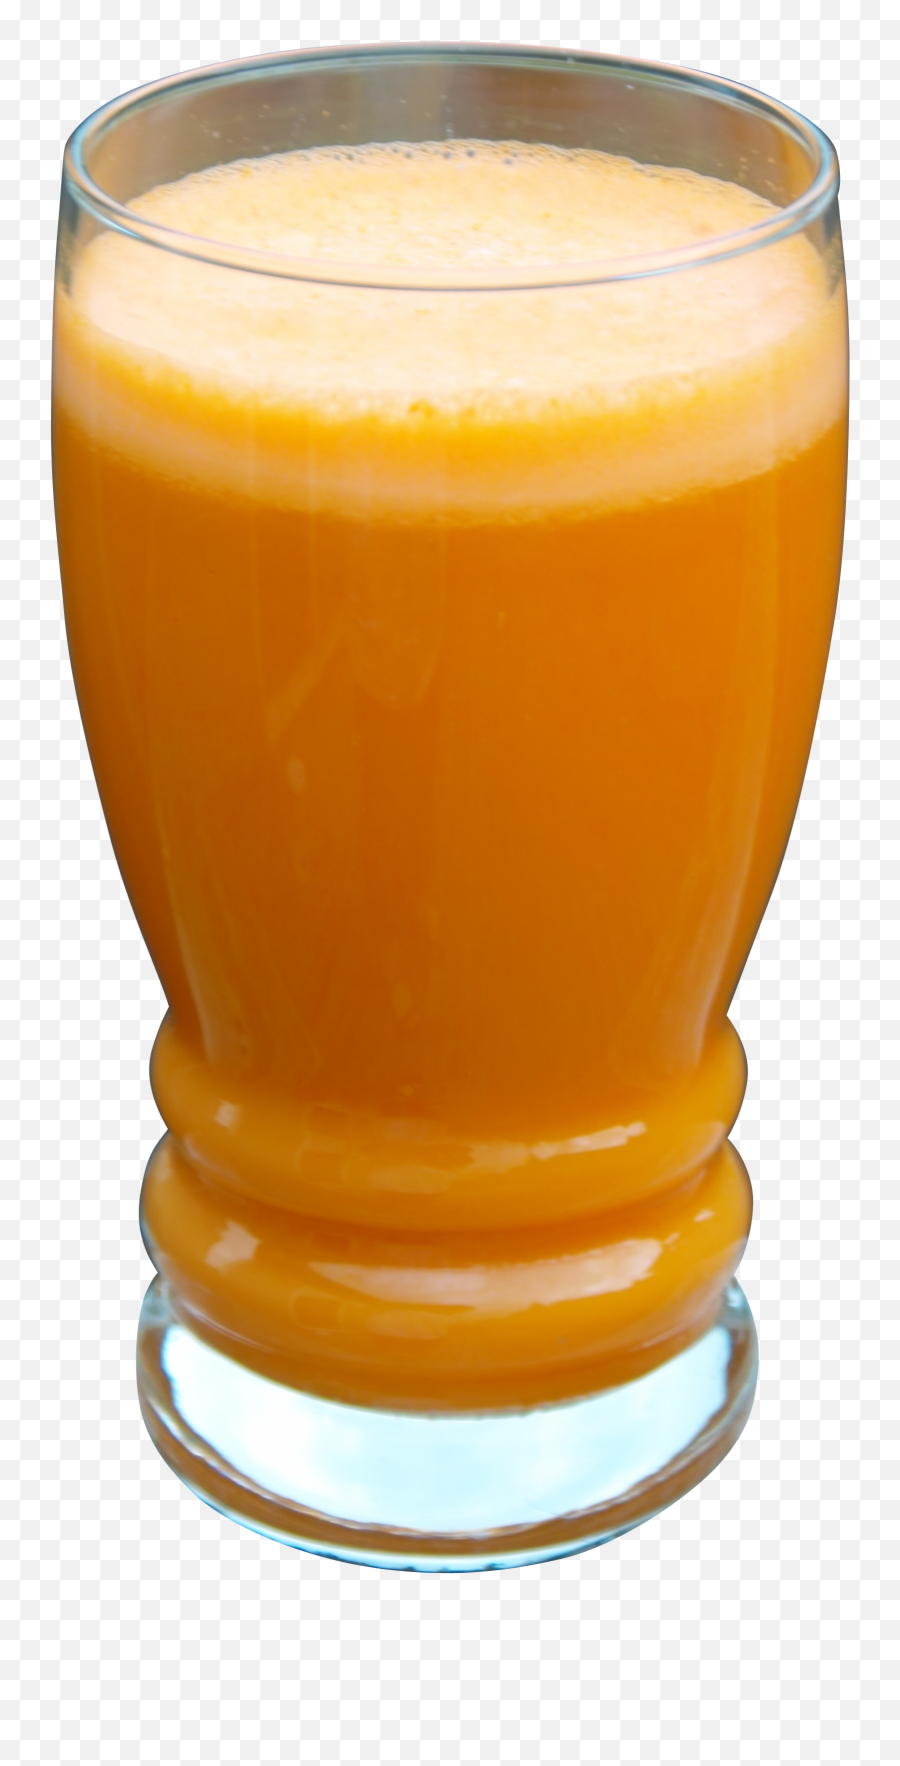 Glass Filled With Orange Carrot Juice - Carrot Juice Transparent Background Png,Juice Png